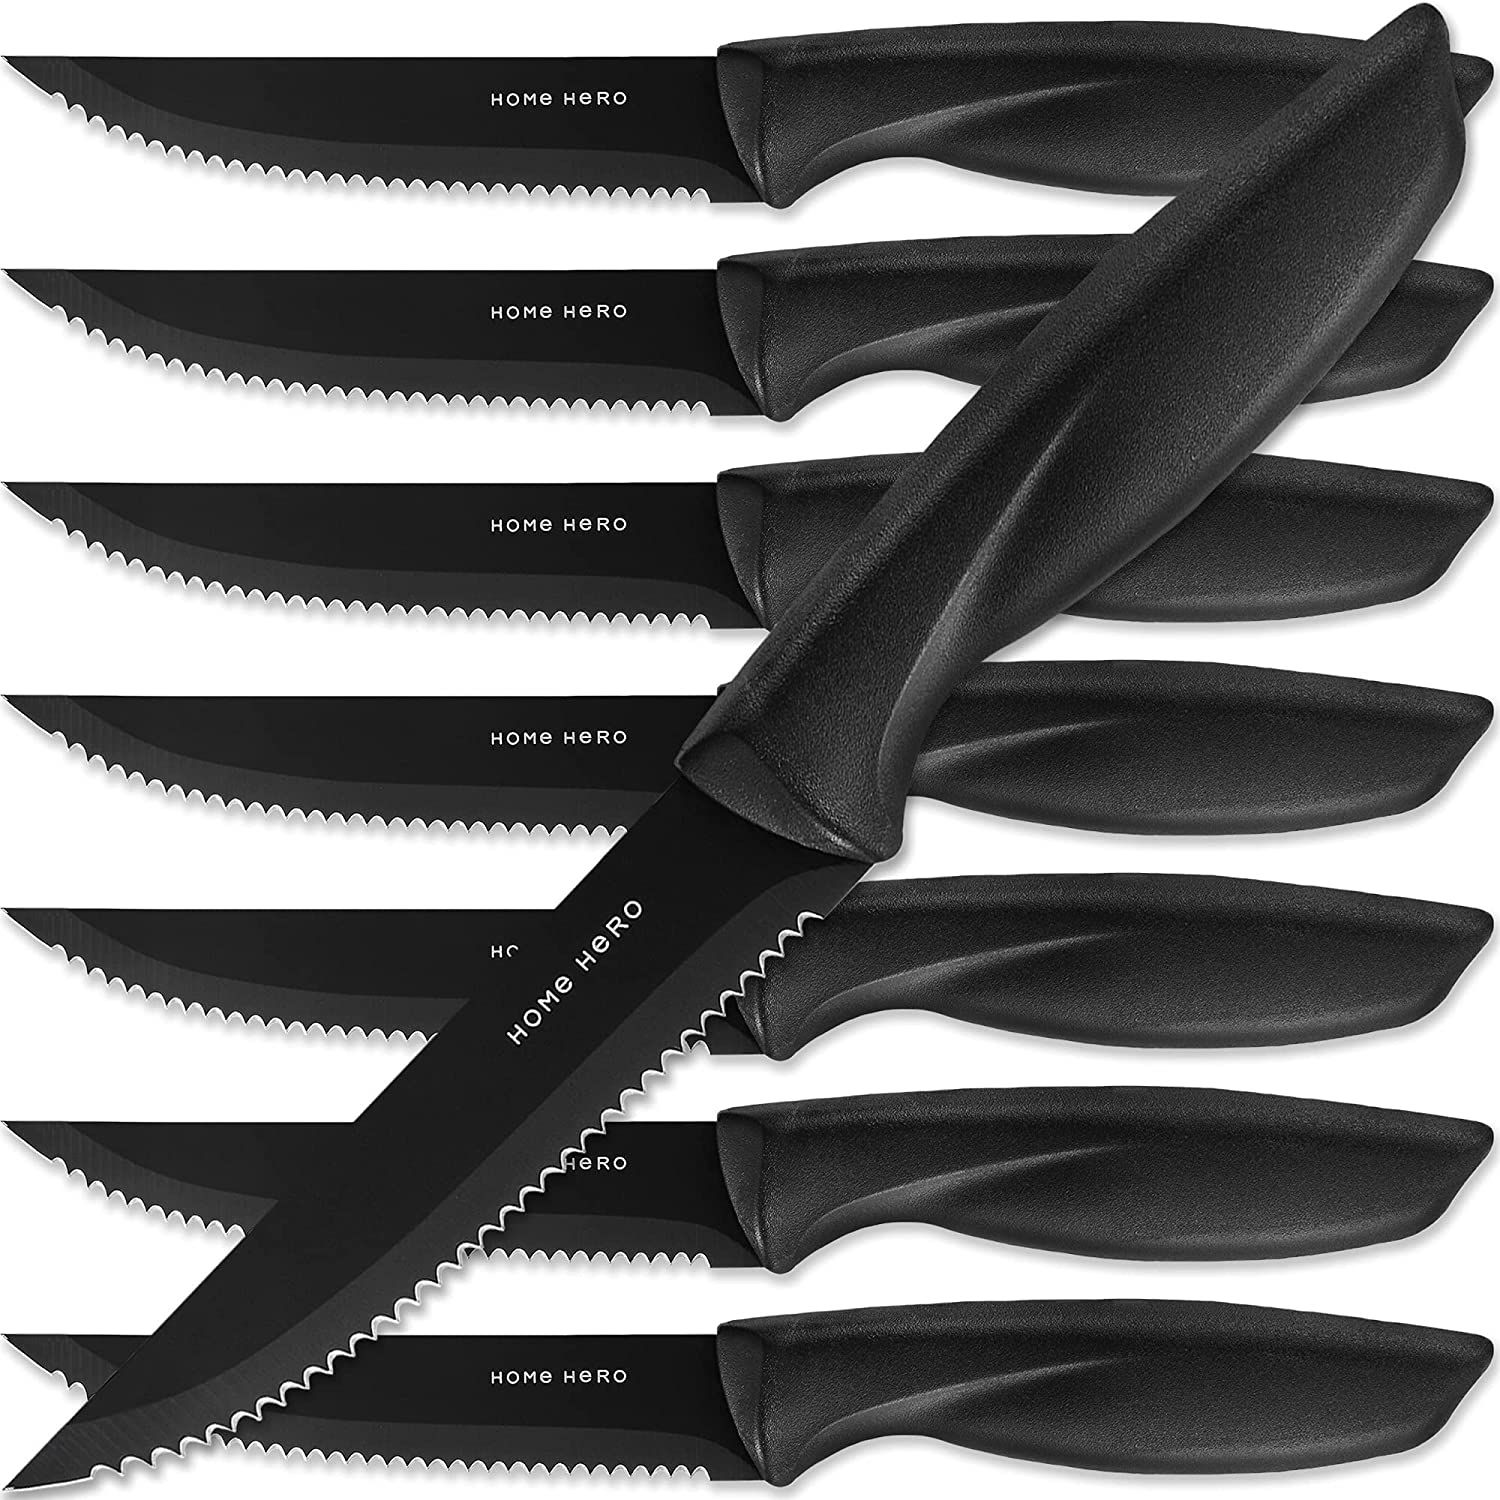 Amazon.com: Home Hero Kitchen Knife Set - 8 piece Chef Knife Set with Stainless Steel Knives Set ... | Amazon (US)